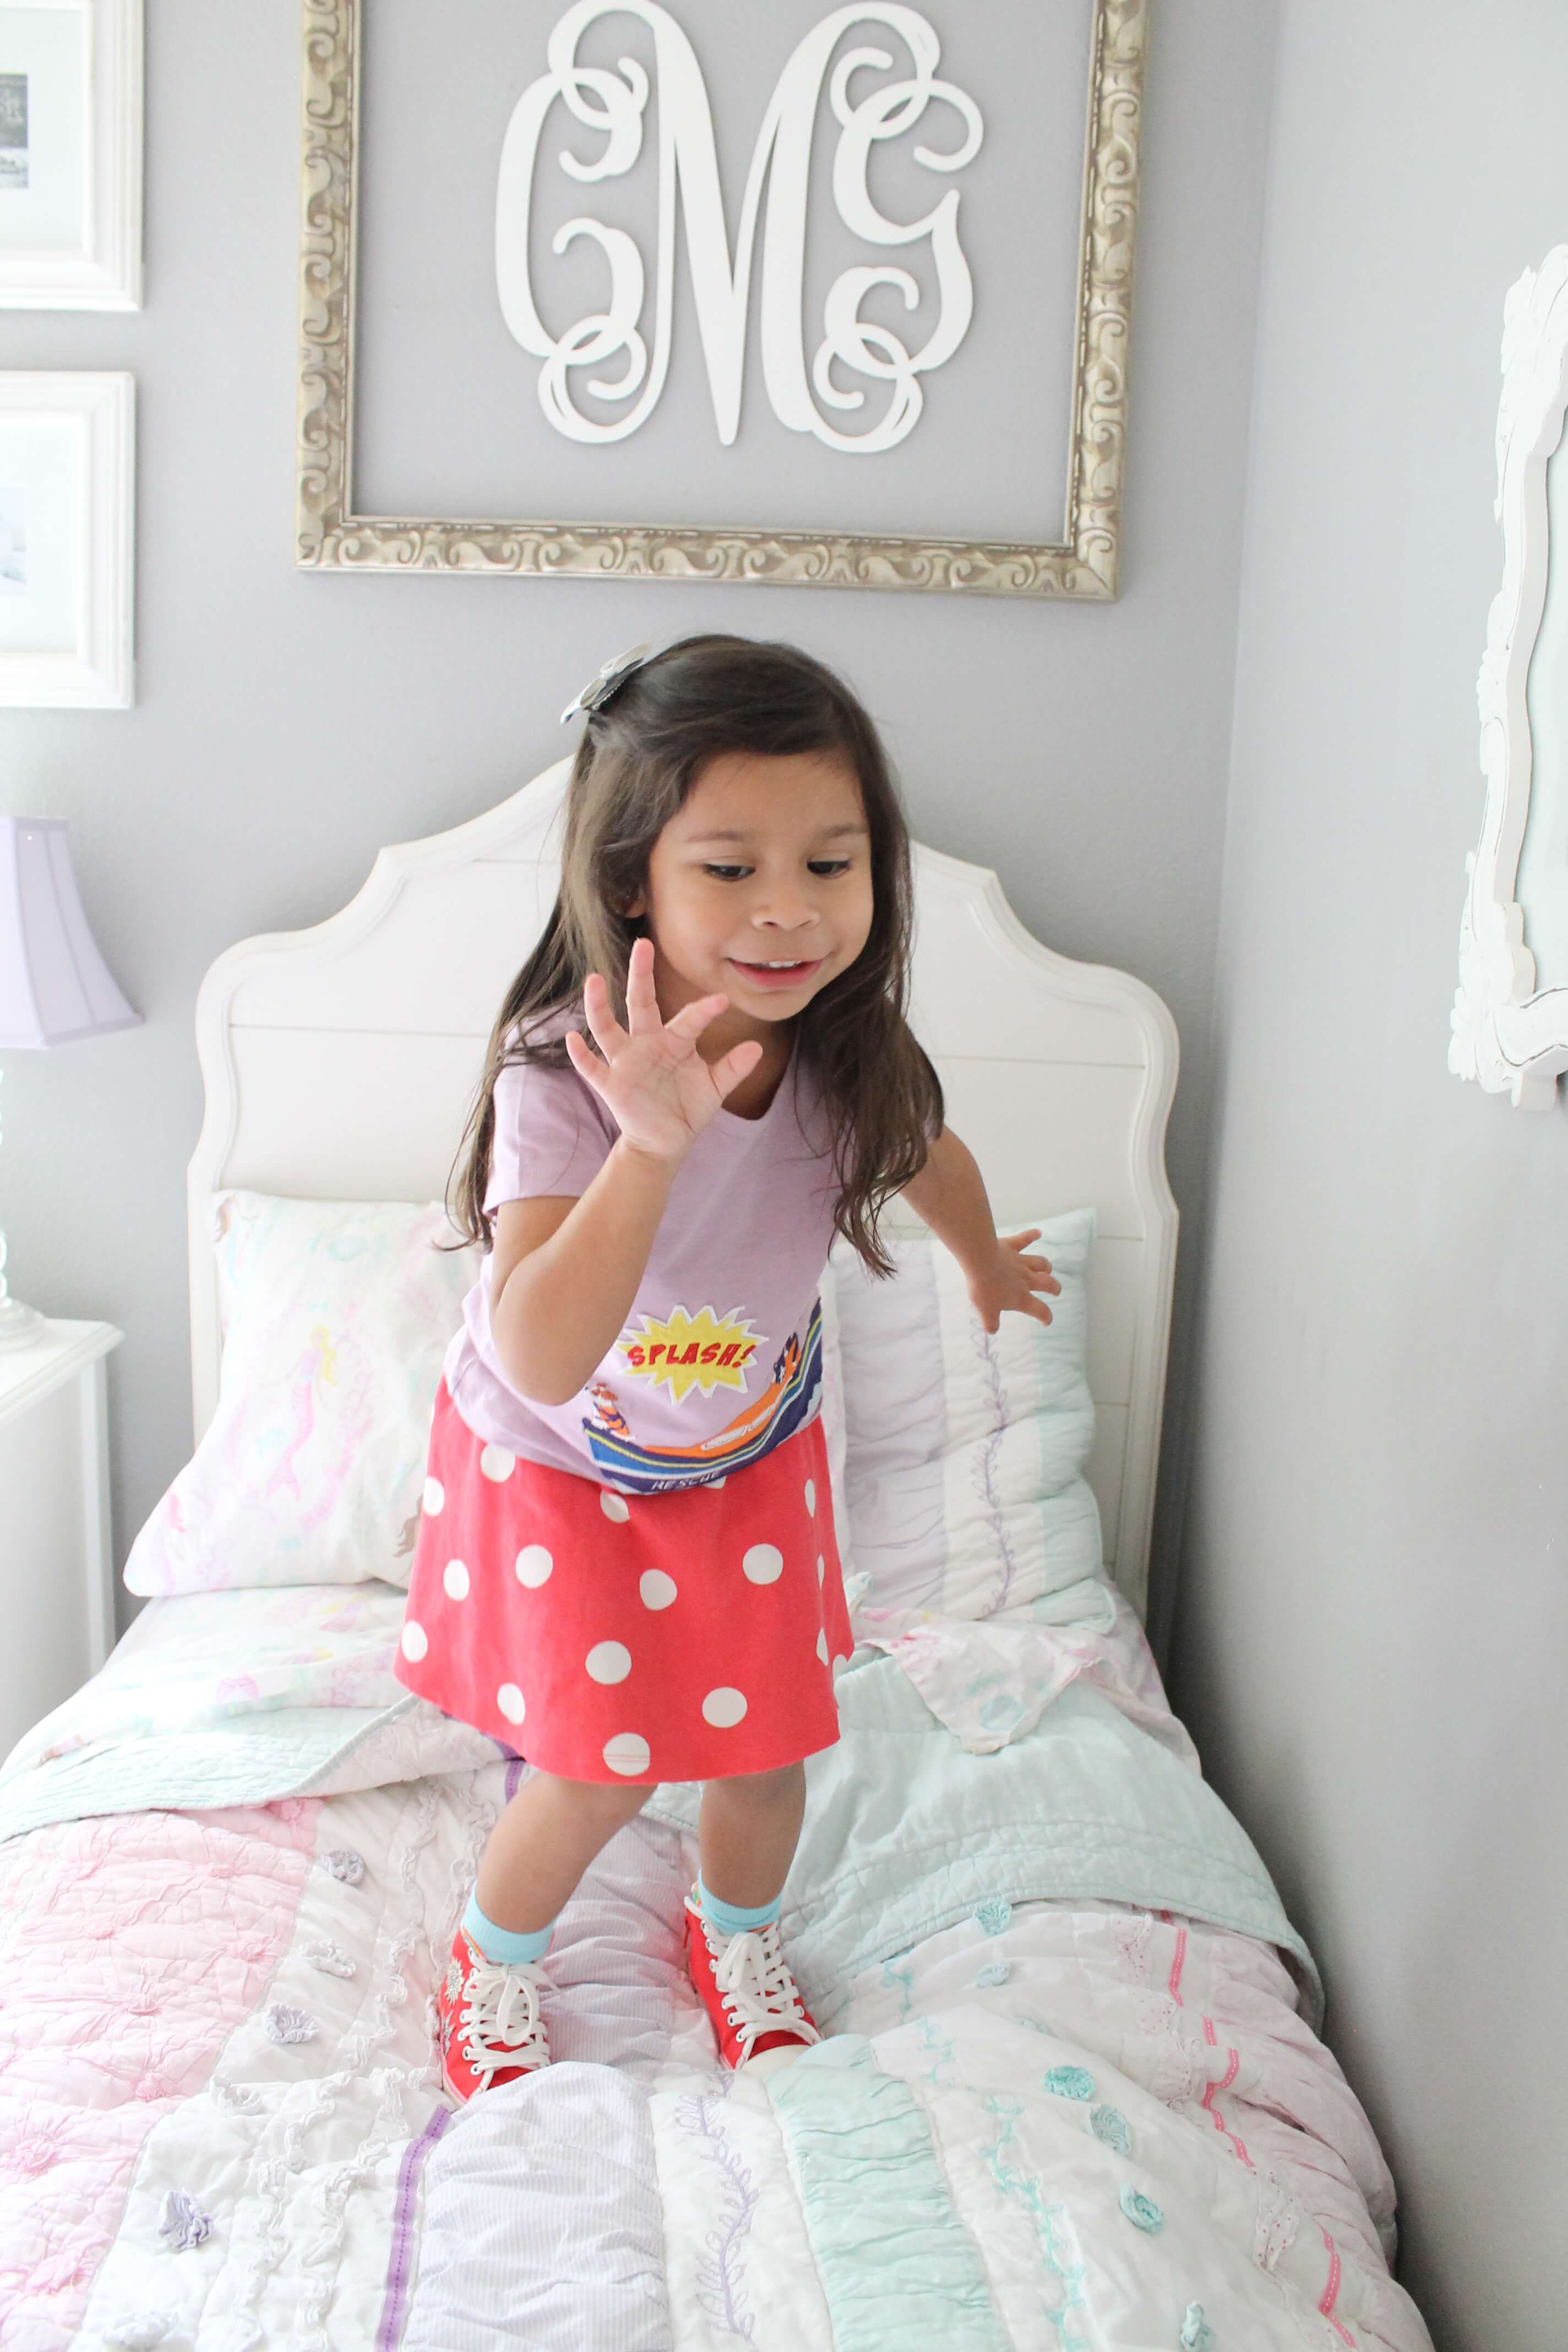 My hero! Cute kids spring clothes with a hero & rescue theme. Mini Boden's spring line & 500 giveaway! #minibodentotherescue